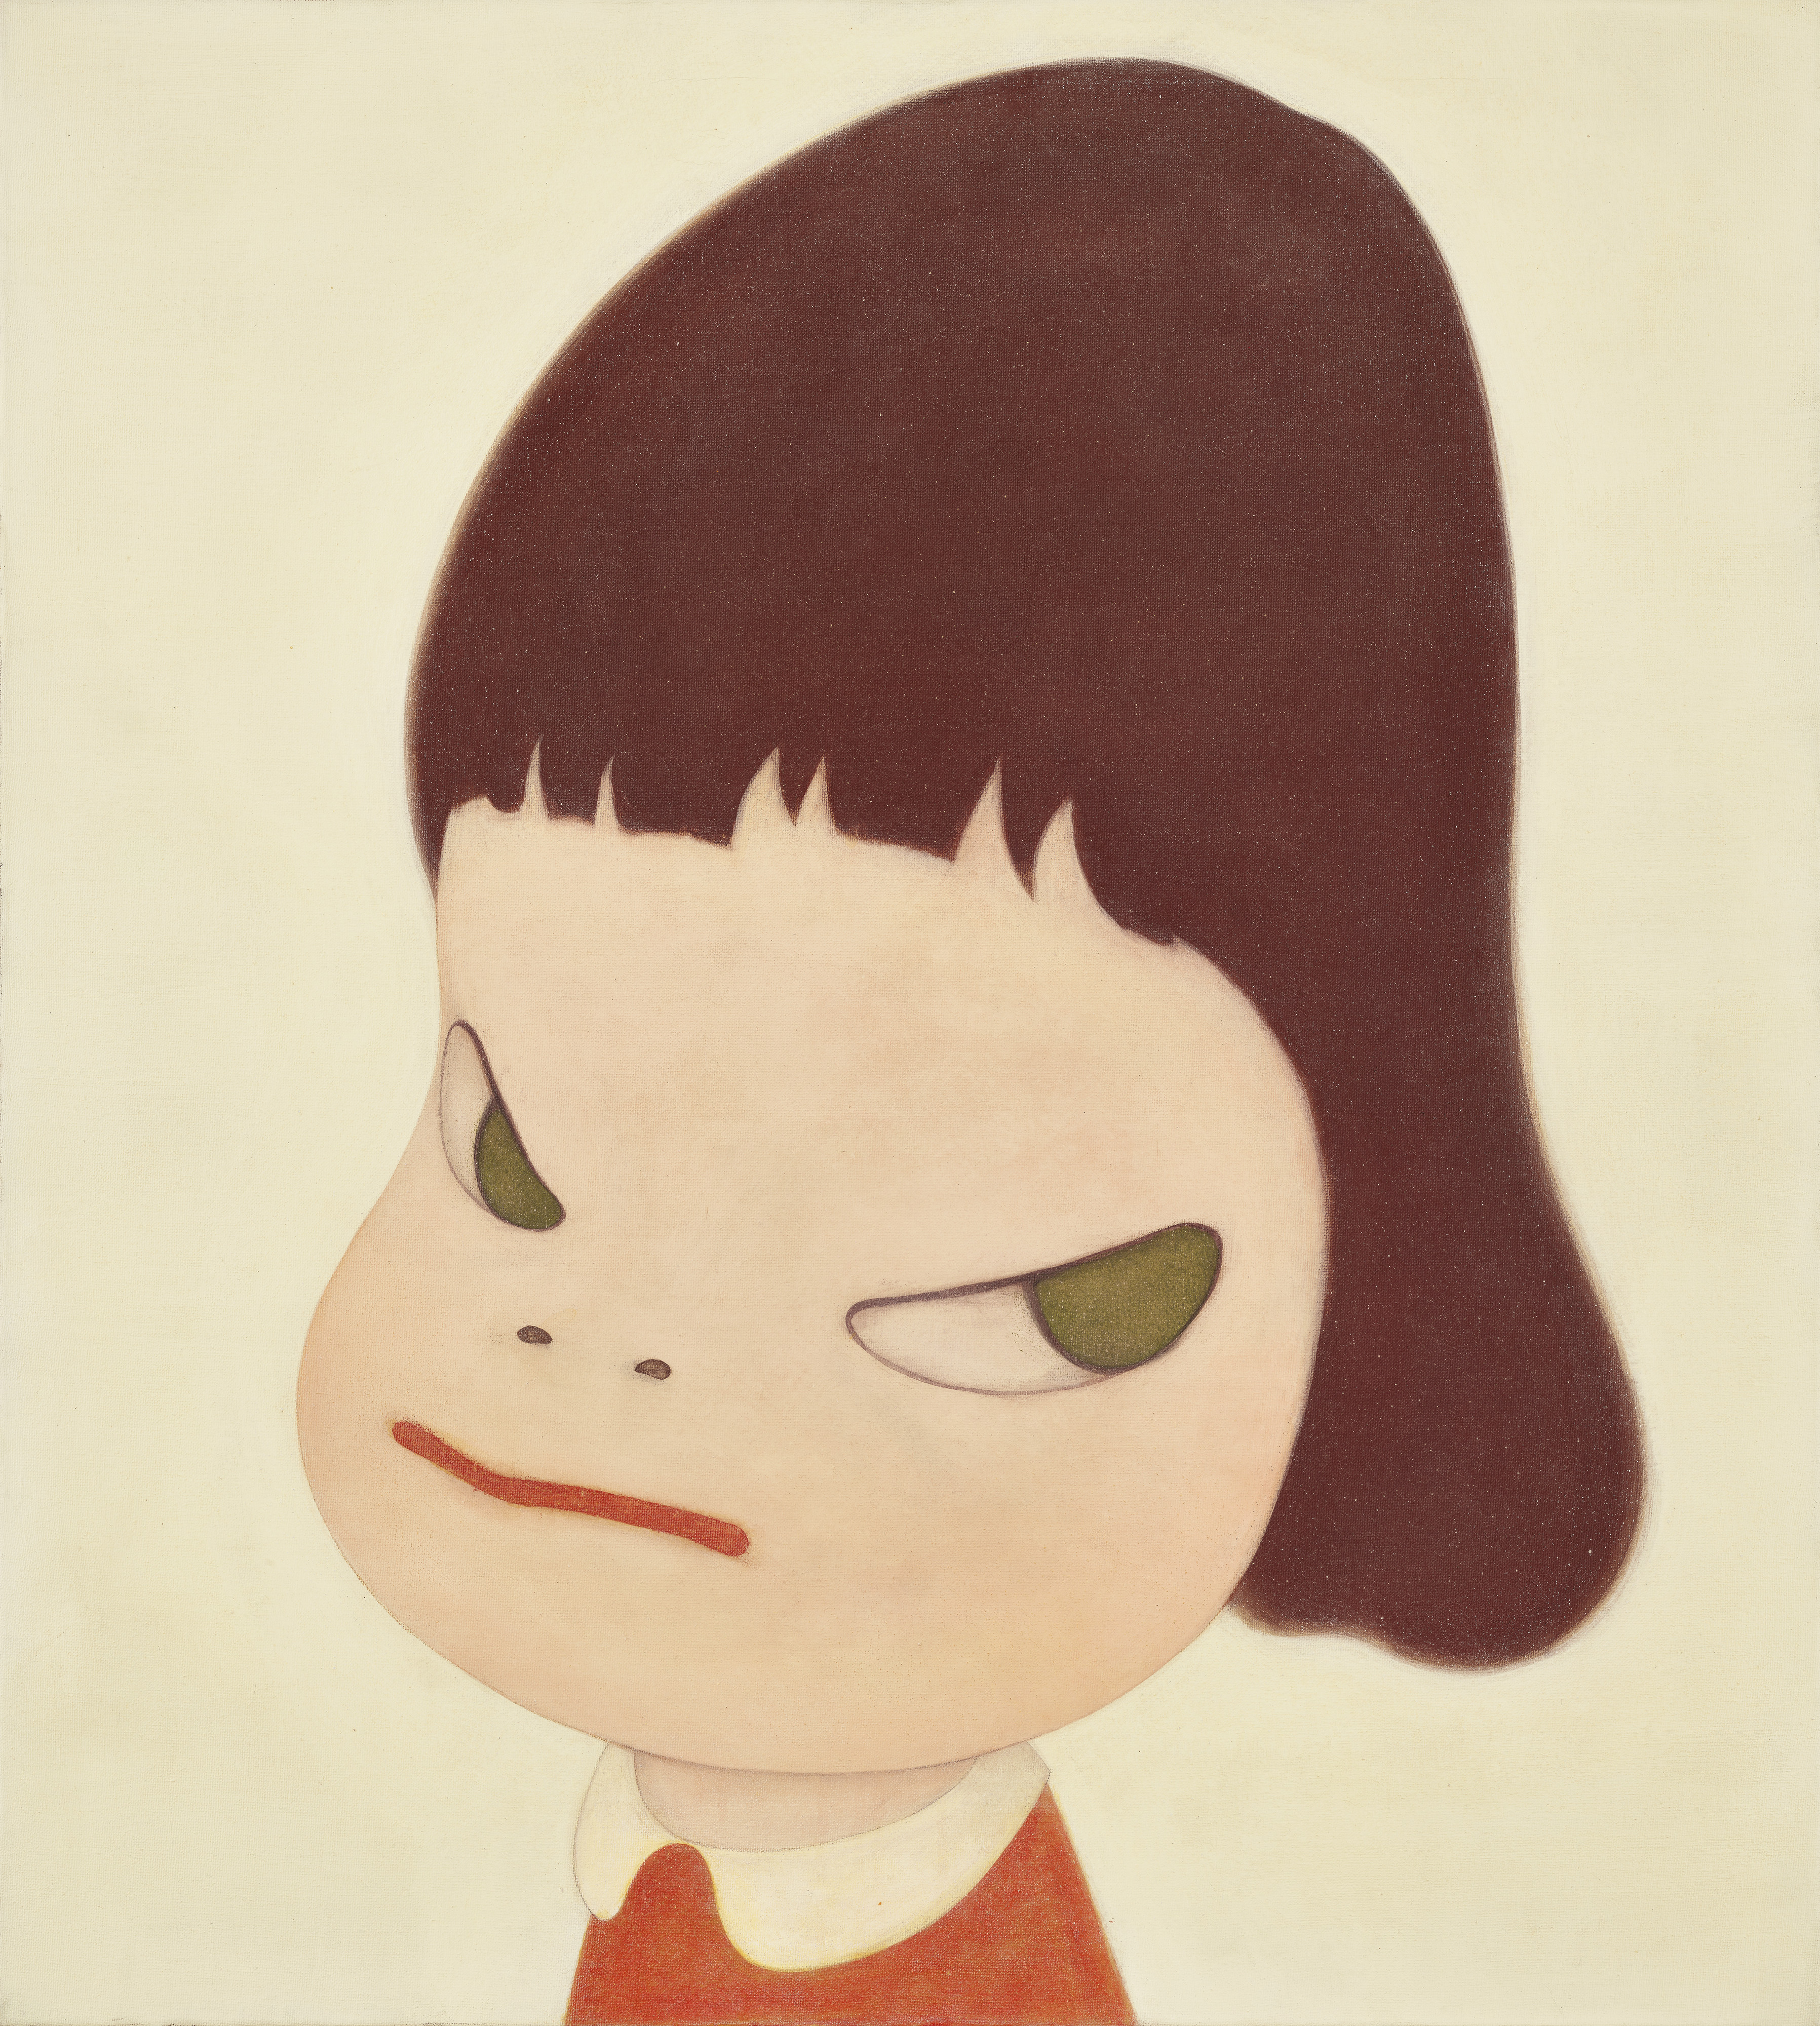 “Bad Barber” (2000), by Yoshitomo Nara, sold for HK$51.2 million including fees on November 28 during Christie’s 20th- and 21st-century art evening sale in Hong Kong, part of the auction house’s 2023 autumn sales. Photo: Christie’s

